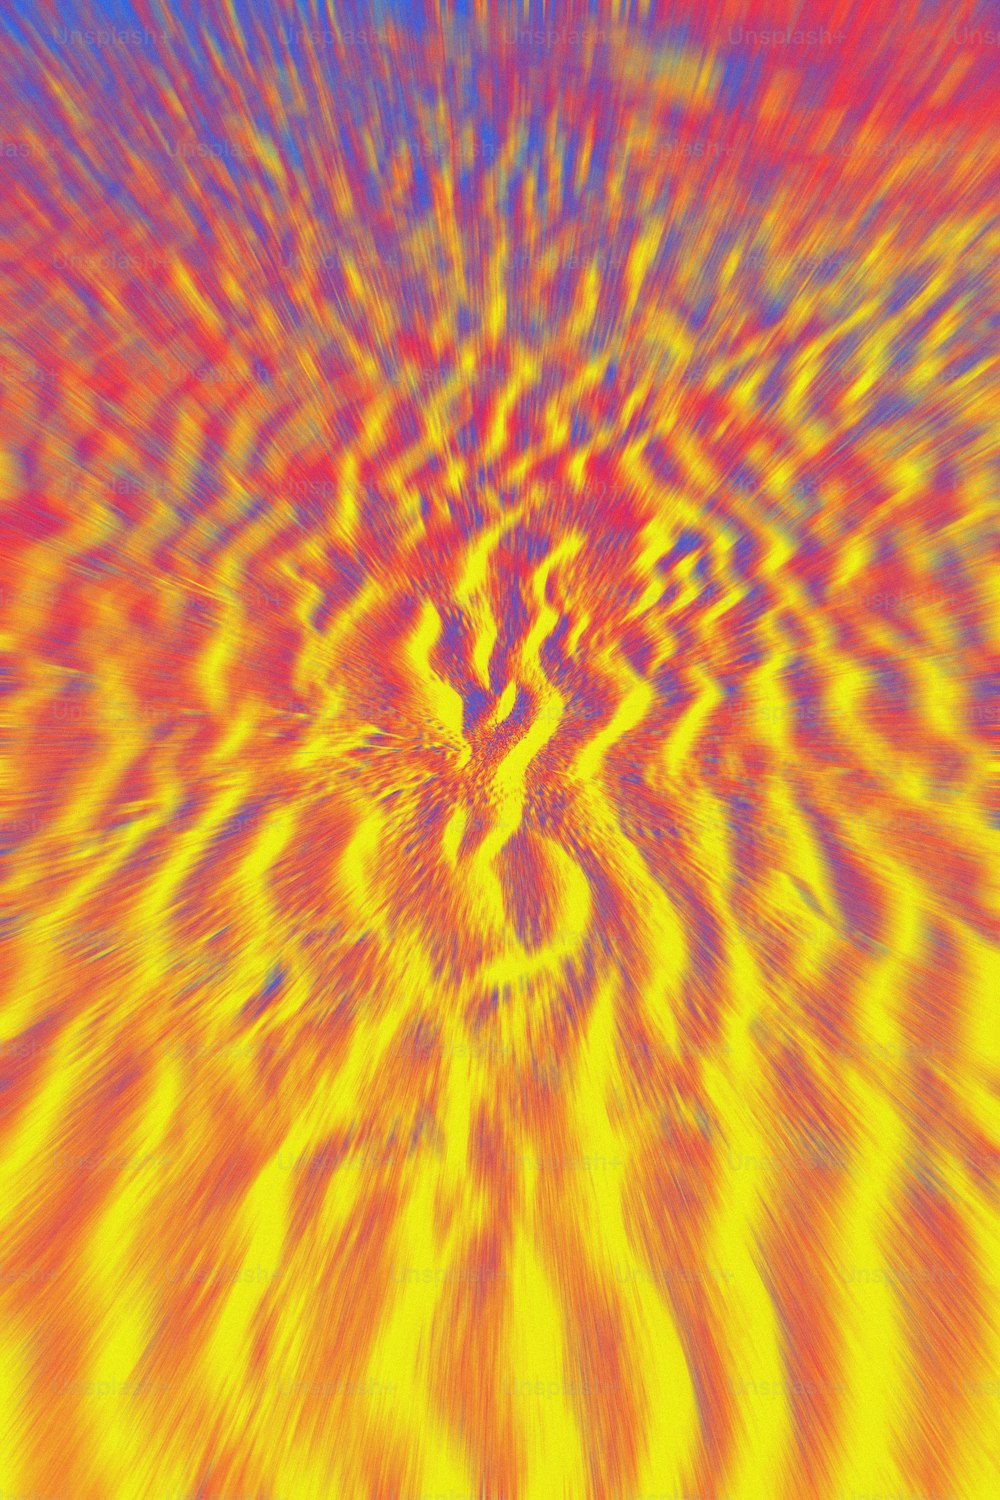 an abstract image of a yellow and red swirl